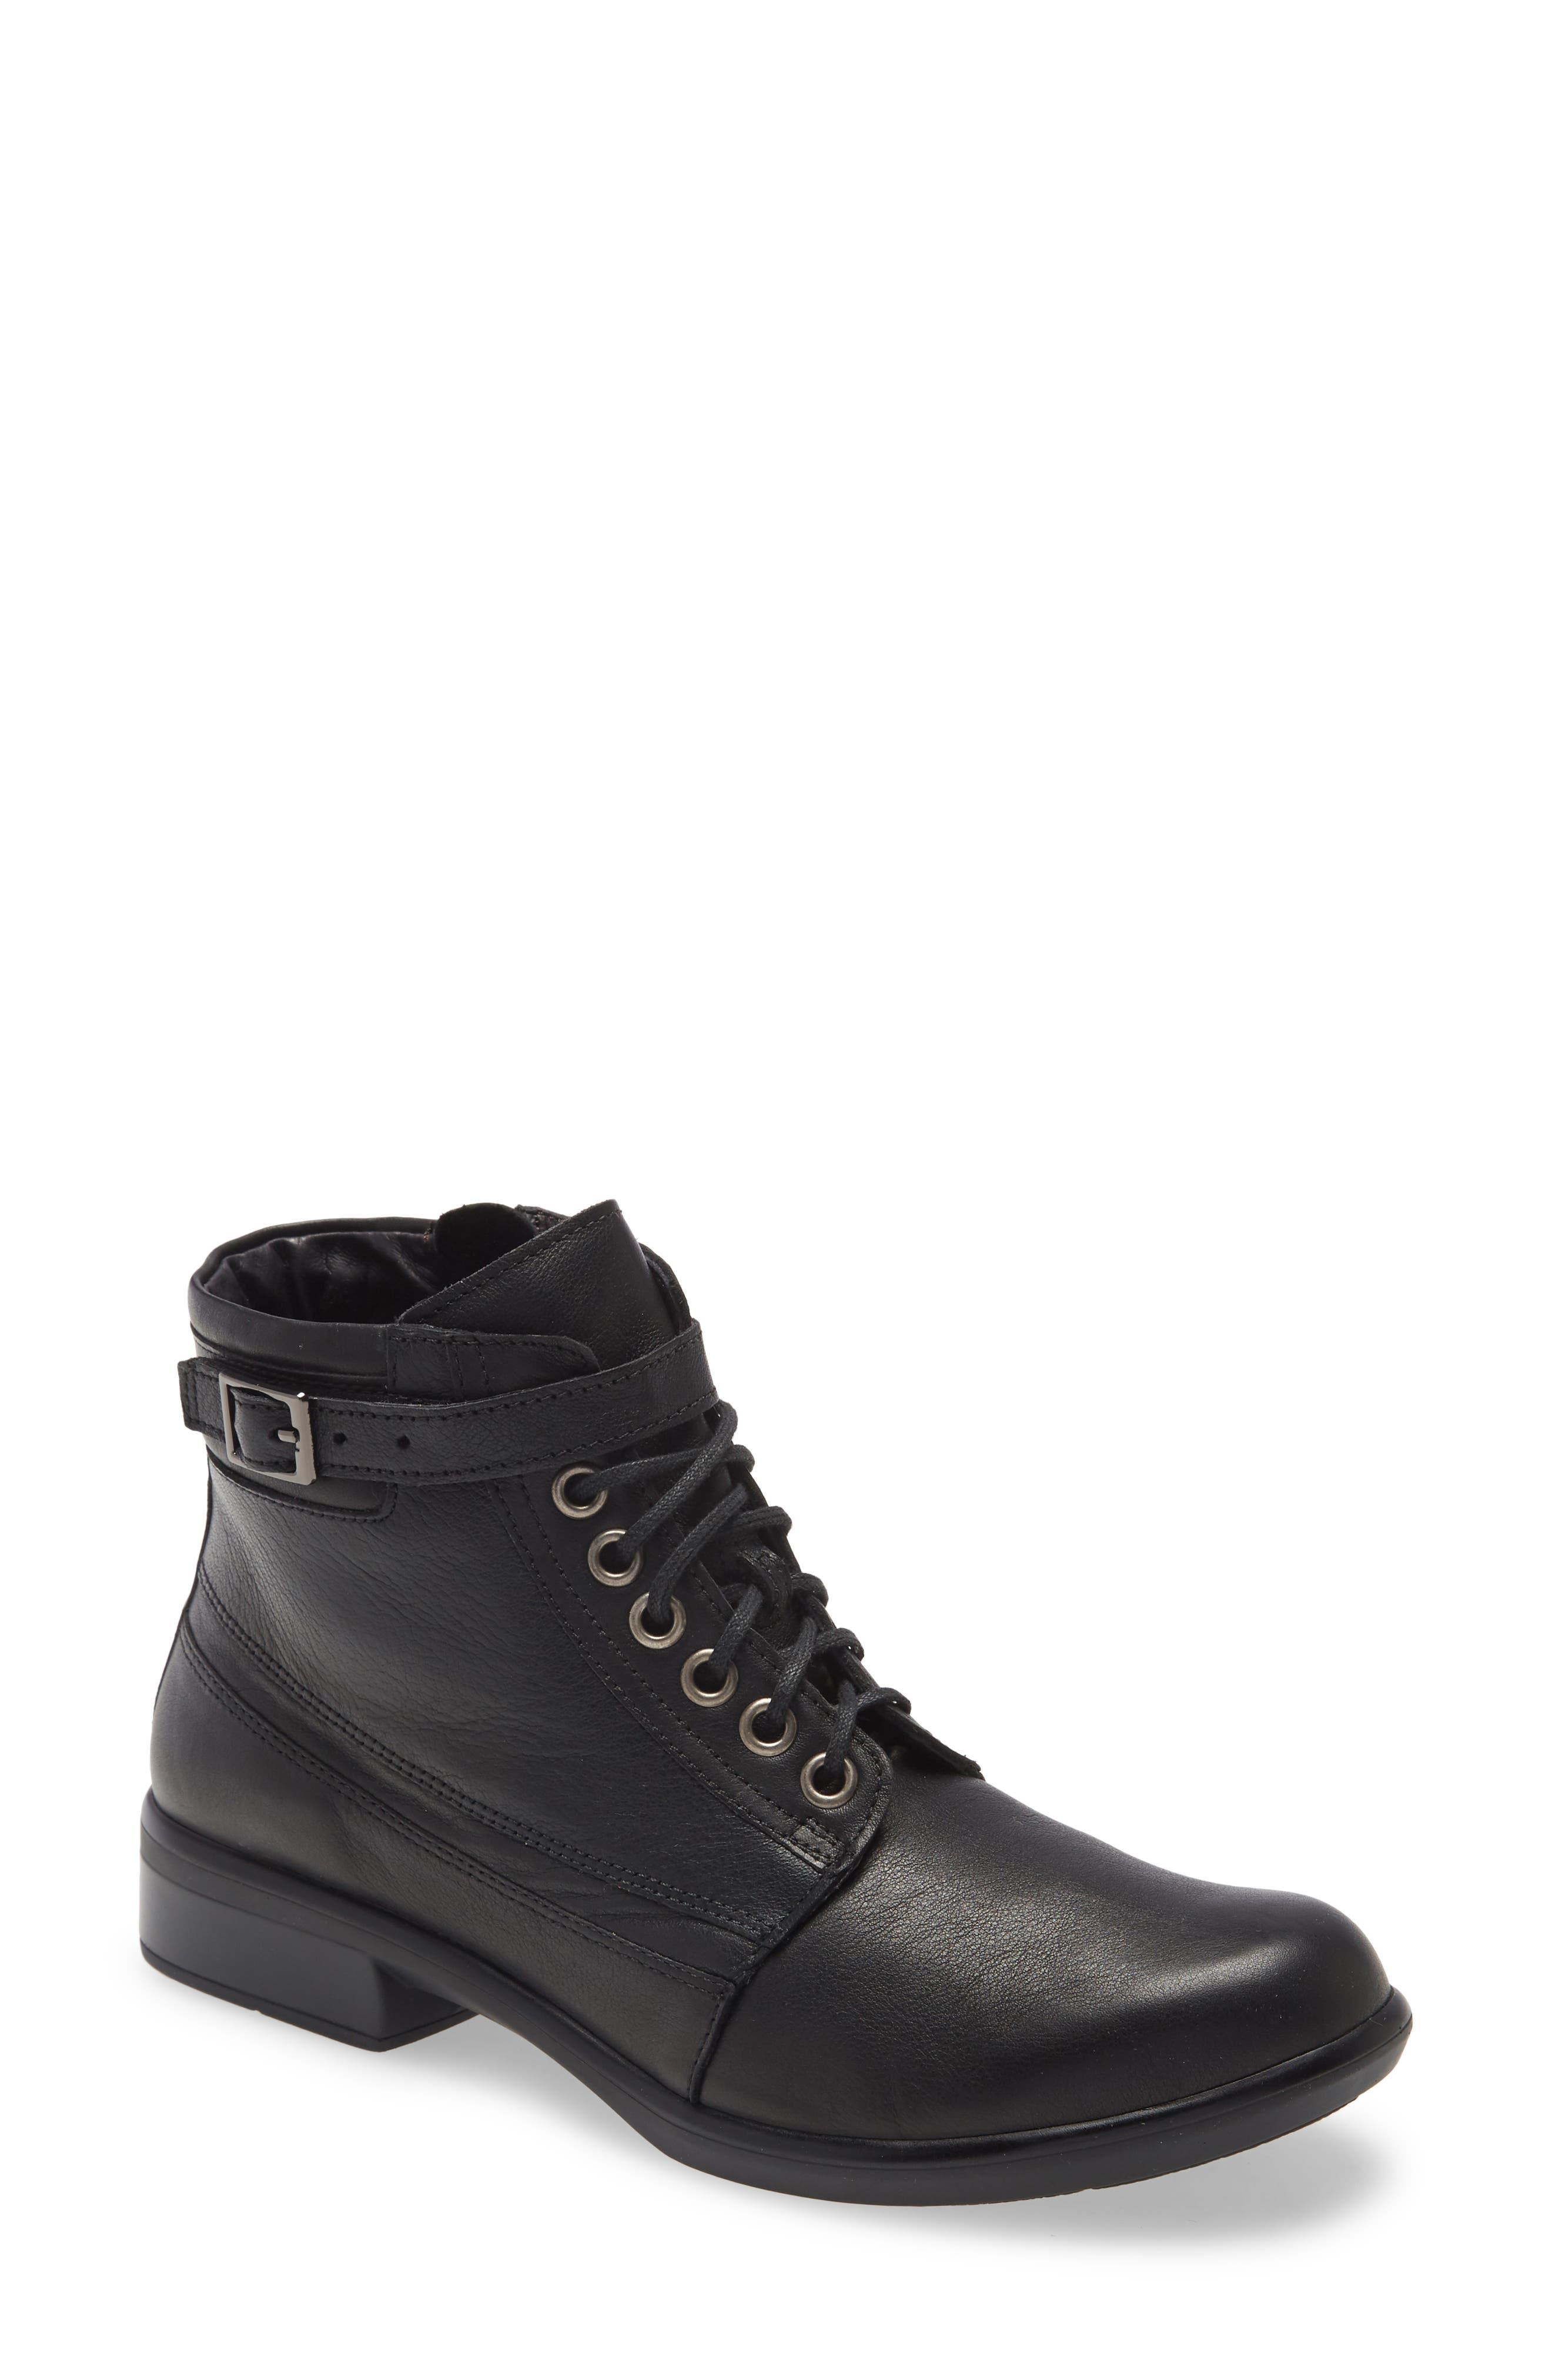 Herno quilted-ankle leather boot - Black